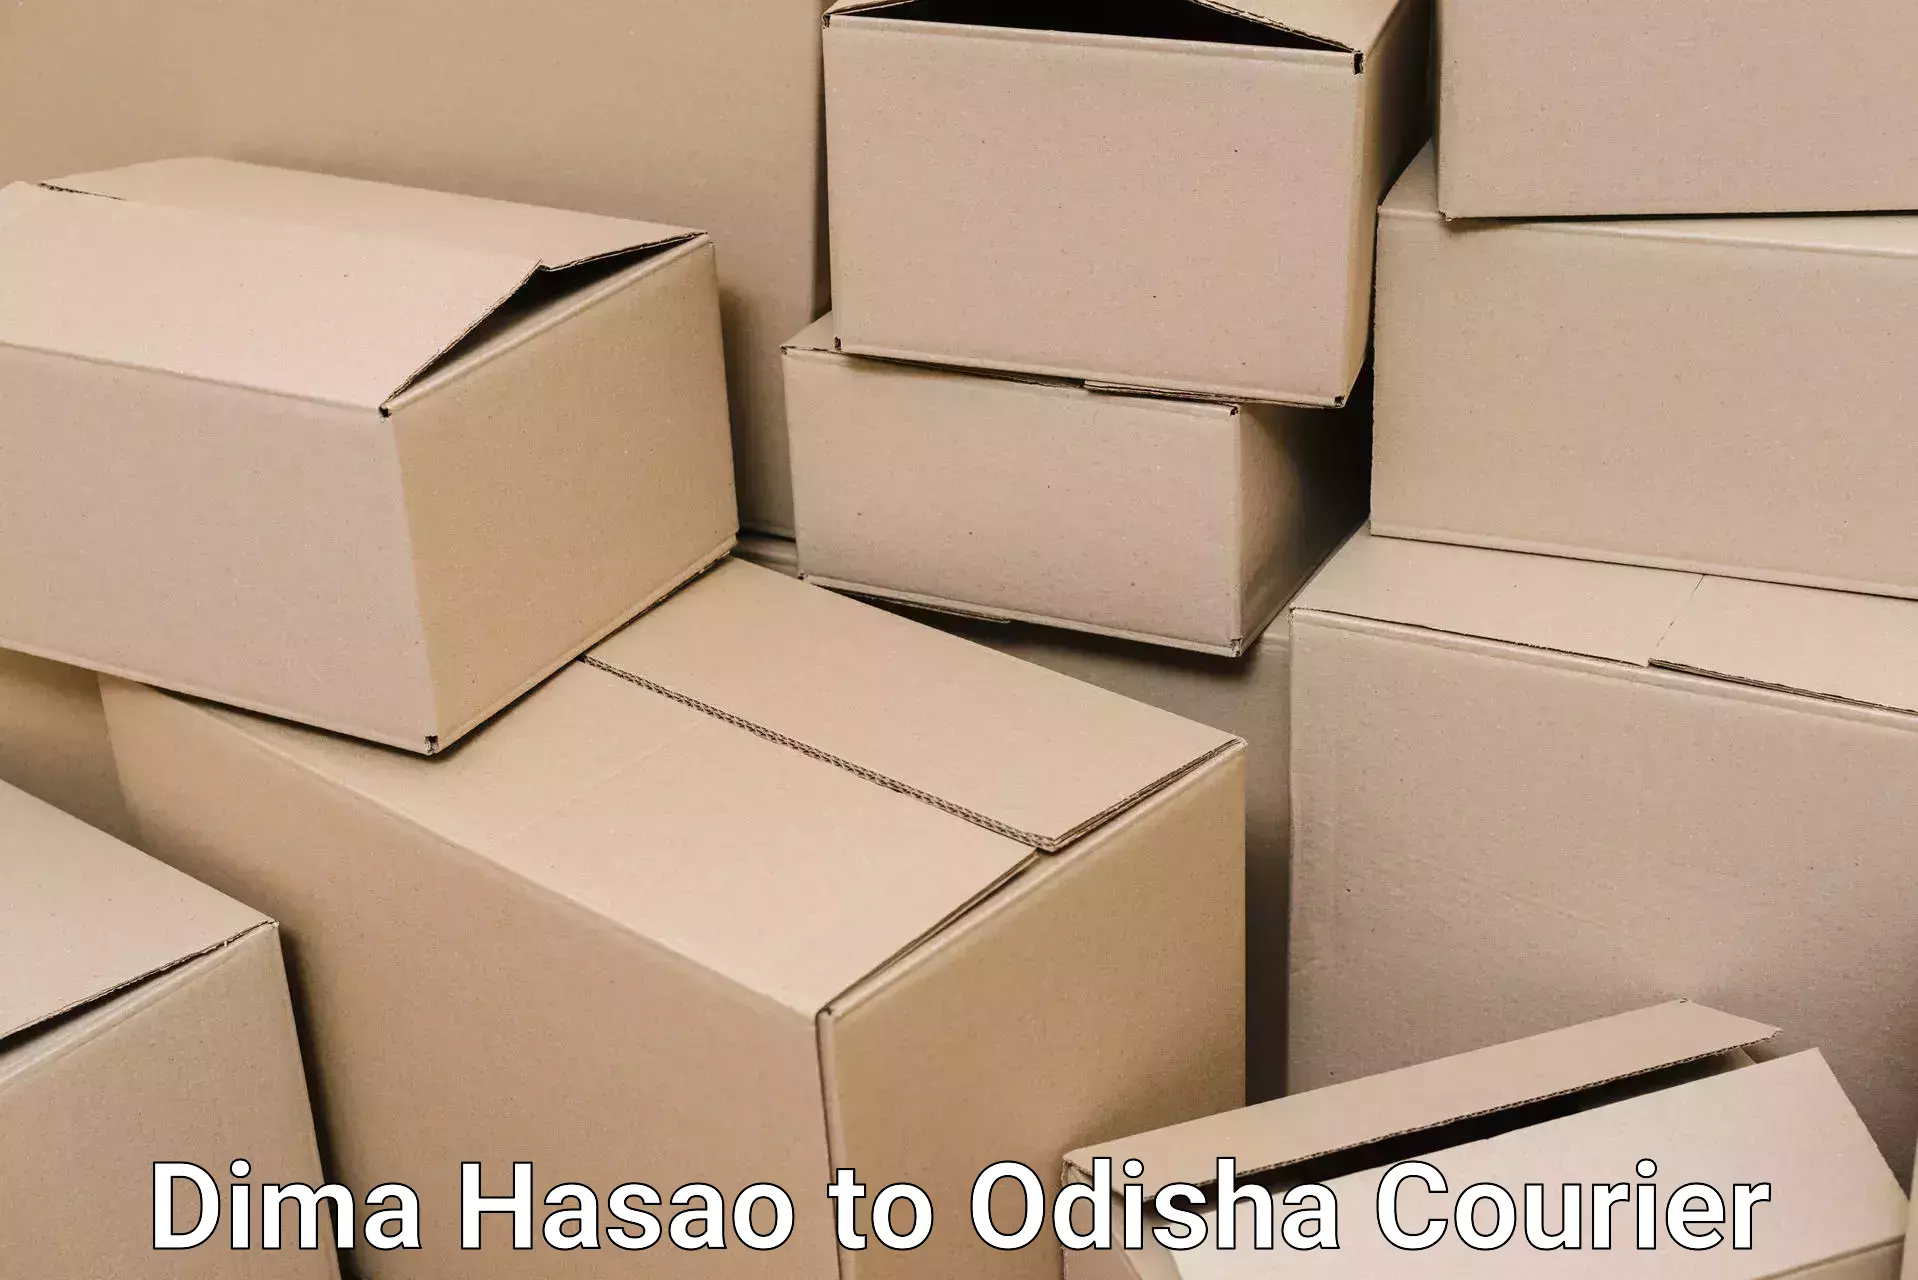 Efficient packing and moving Dima Hasao to Binka